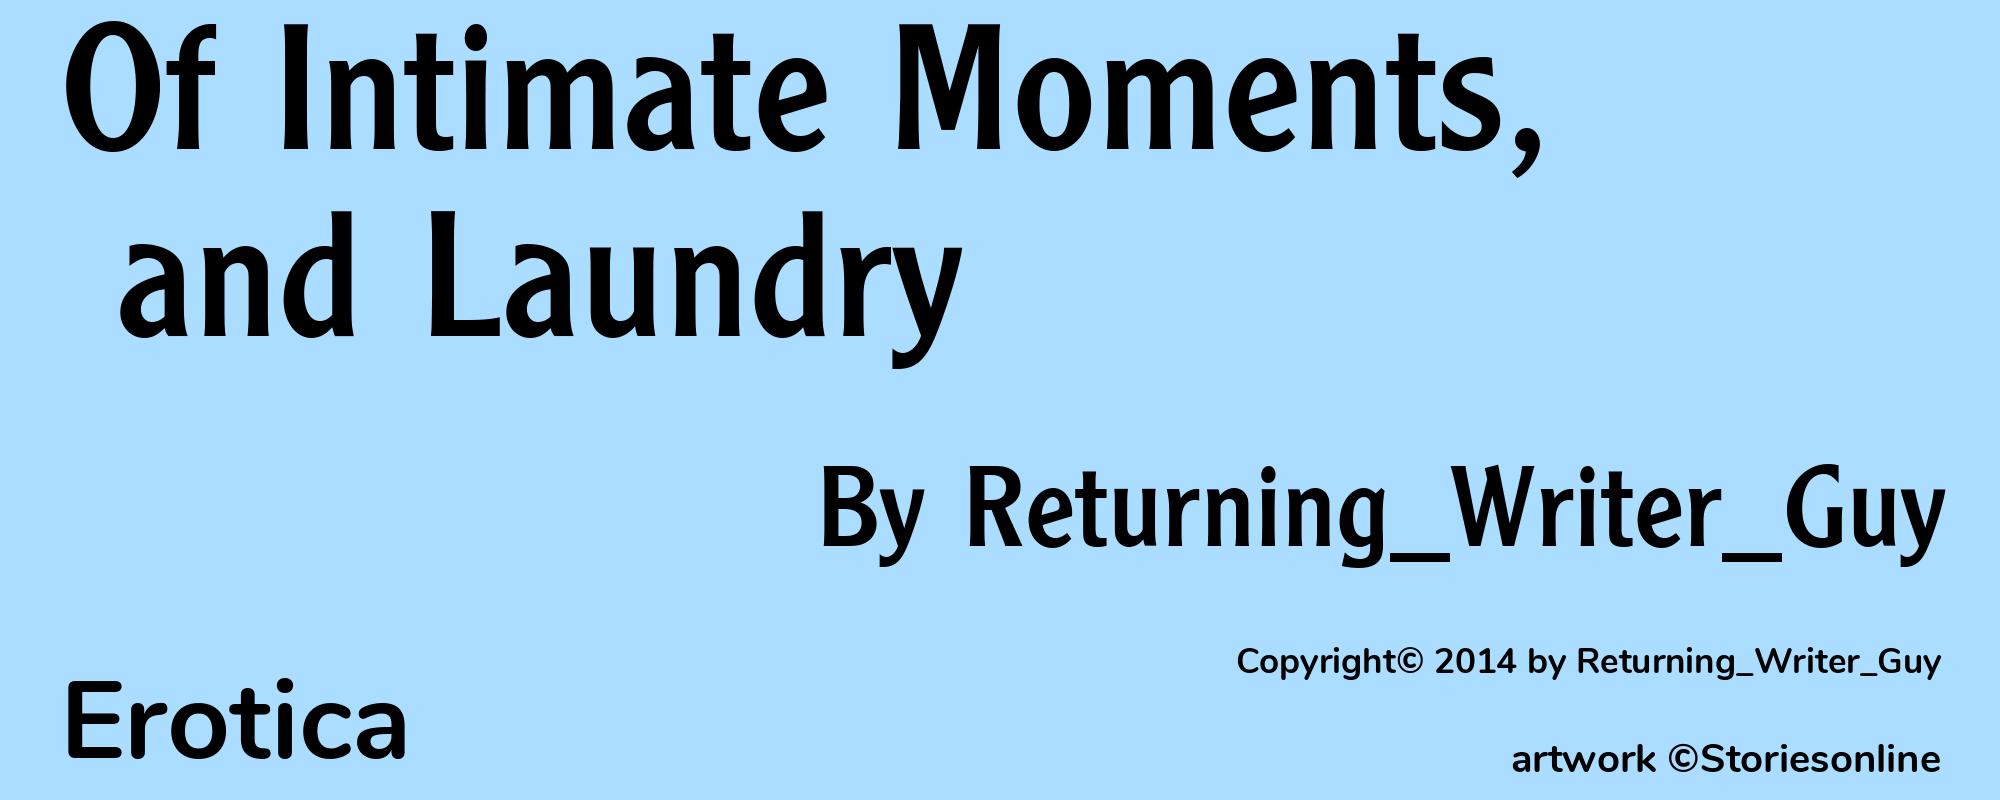 Of Intimate Moments, and Laundry - Cover